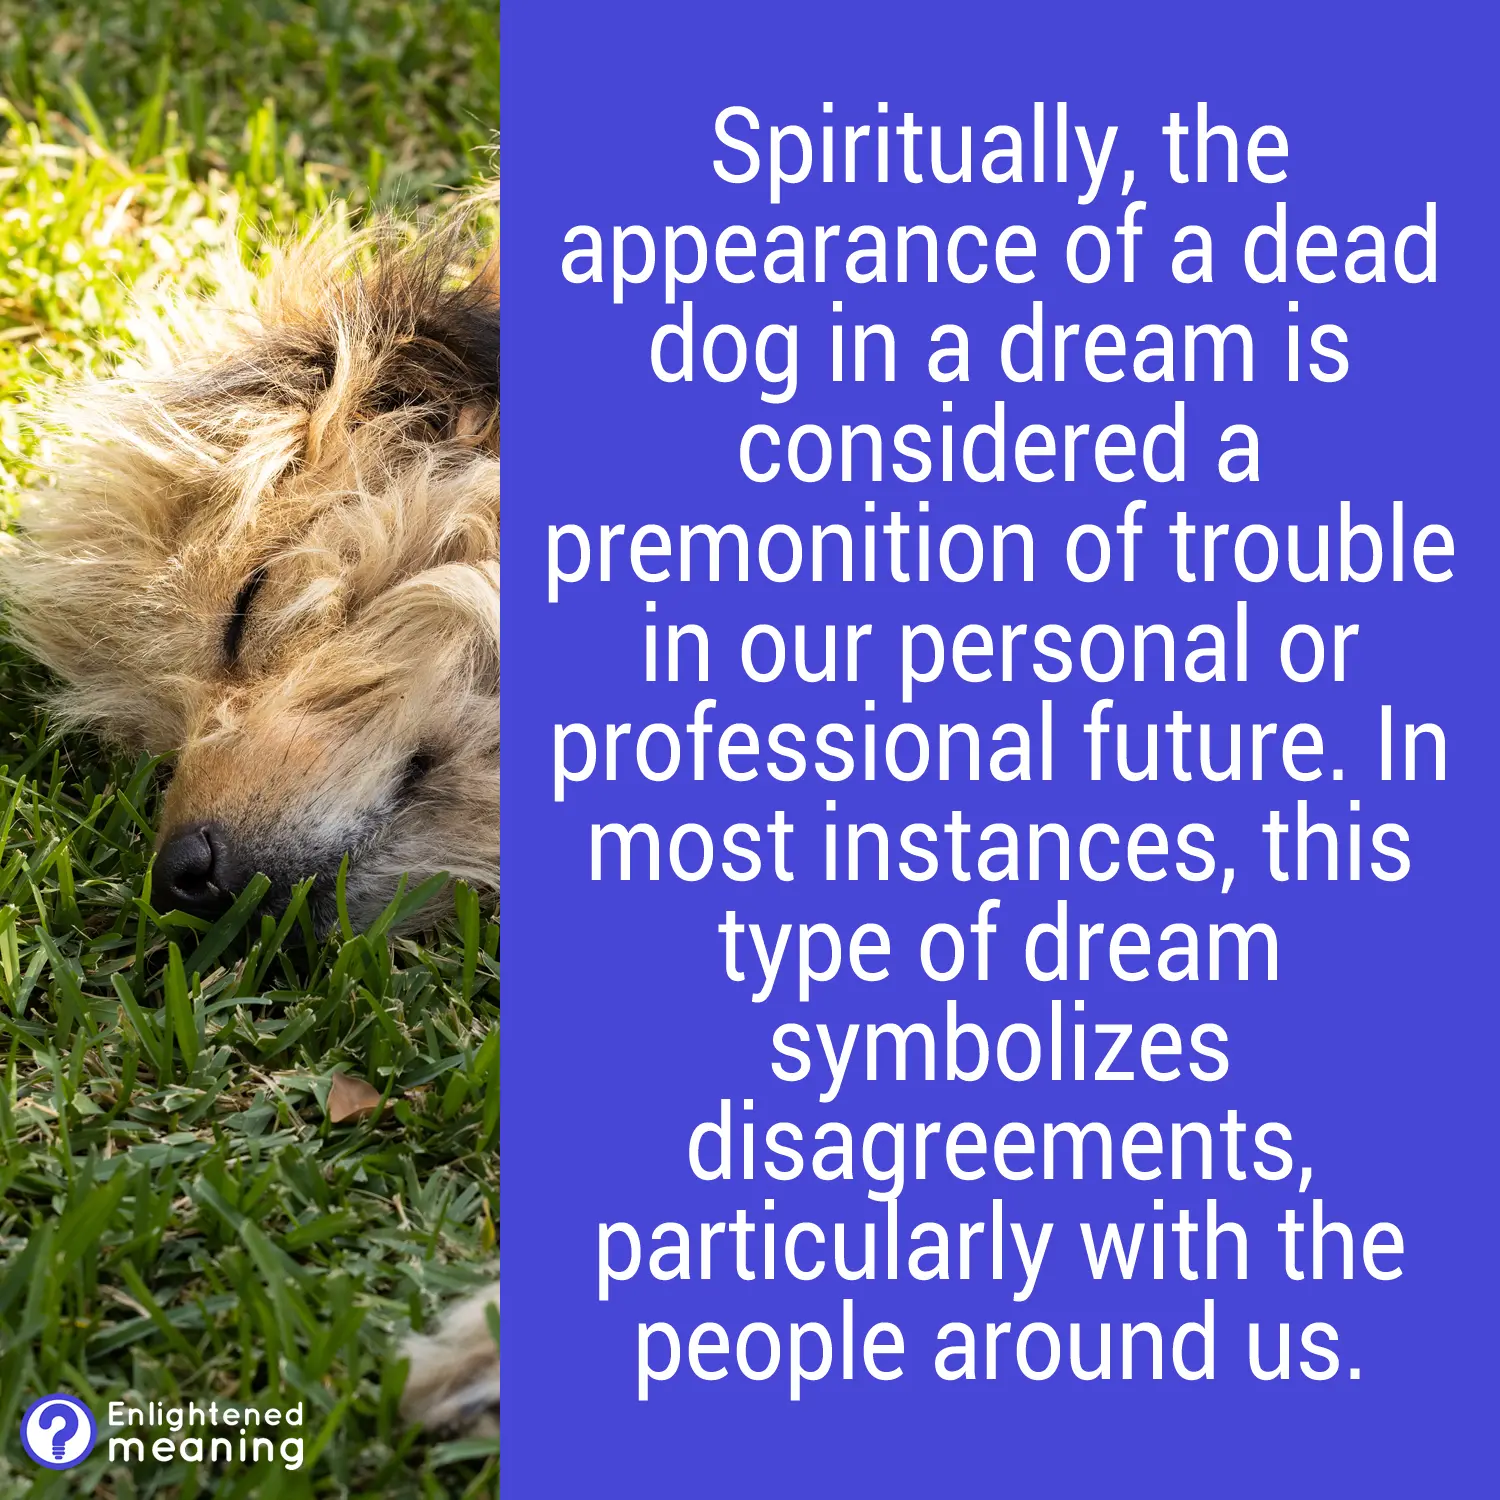 Spiritual meaning of dead dogs in dreams